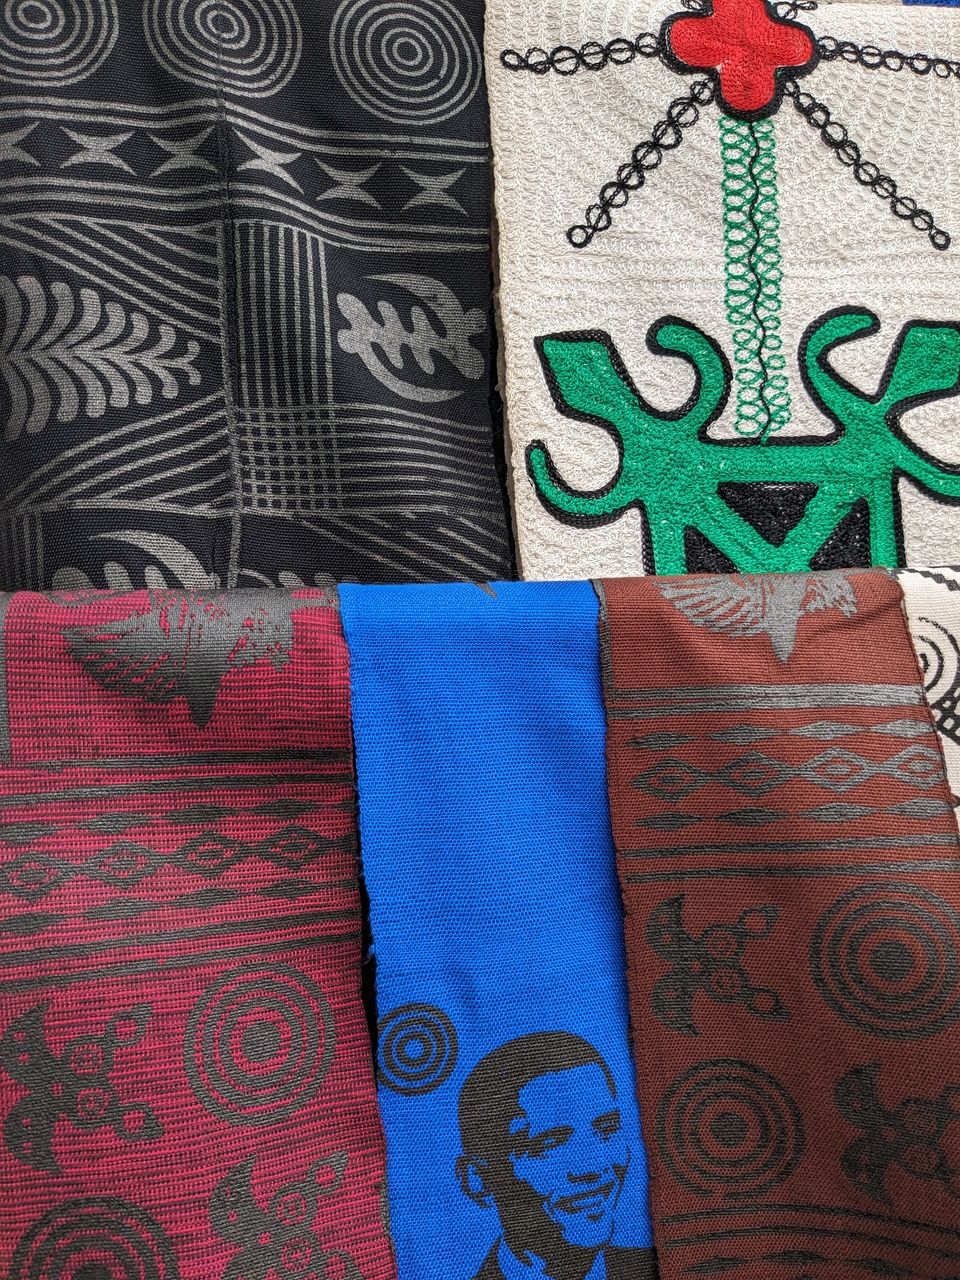 Strips of woven fabric with Adinkra embroidery or dye stamped on them. Innovations also include stamps of prominent figures in various societies.